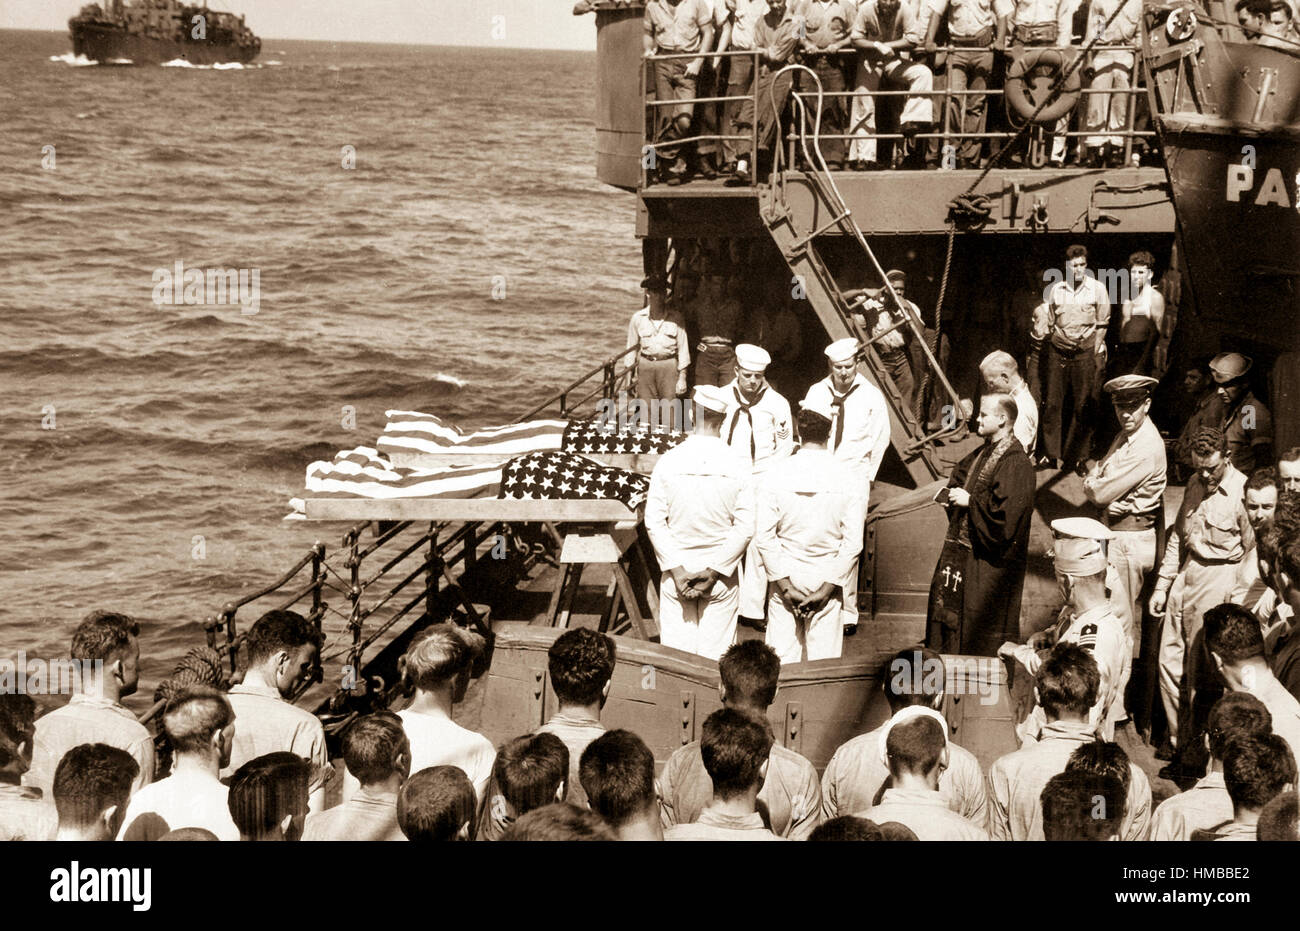 Two enlisted men of the ill-fated U.S. Navy aircraft carrier Liscome Bay, torpedoed by a Japanese submarine in the Gilbert Islands, are buried at sea from the deck of a Coast Guard-manned assault transport.  November 1943.  (Coast Guard) Exact Date Shot Unknown NARA FILE #:  026-G-3182 WAR & CONFLICT BOOK #:  1344 Stock Photo